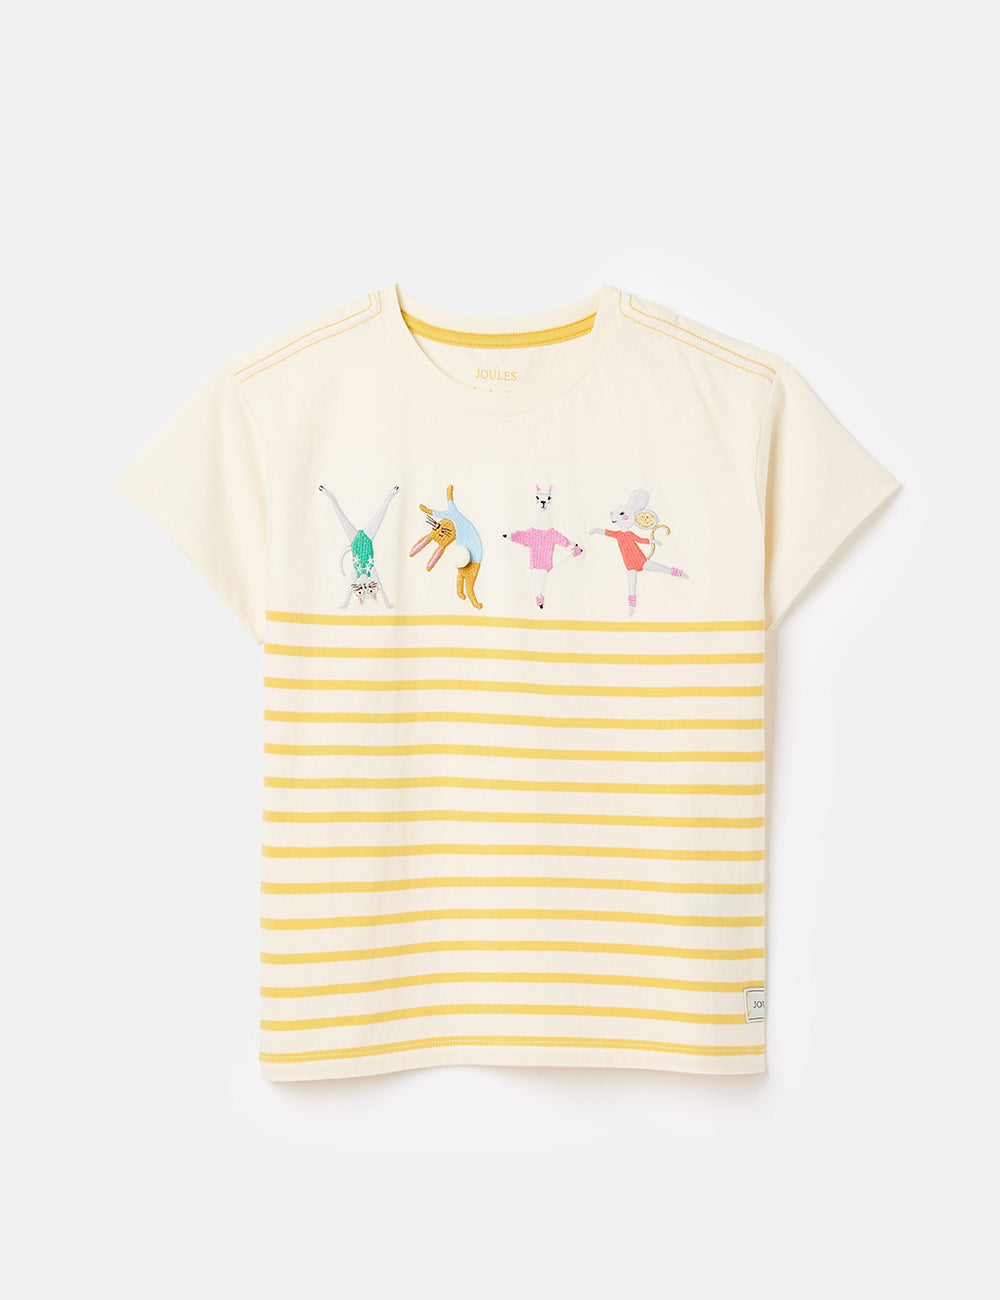 Joules Astra T-Shirt - Cream/Gold Stripe